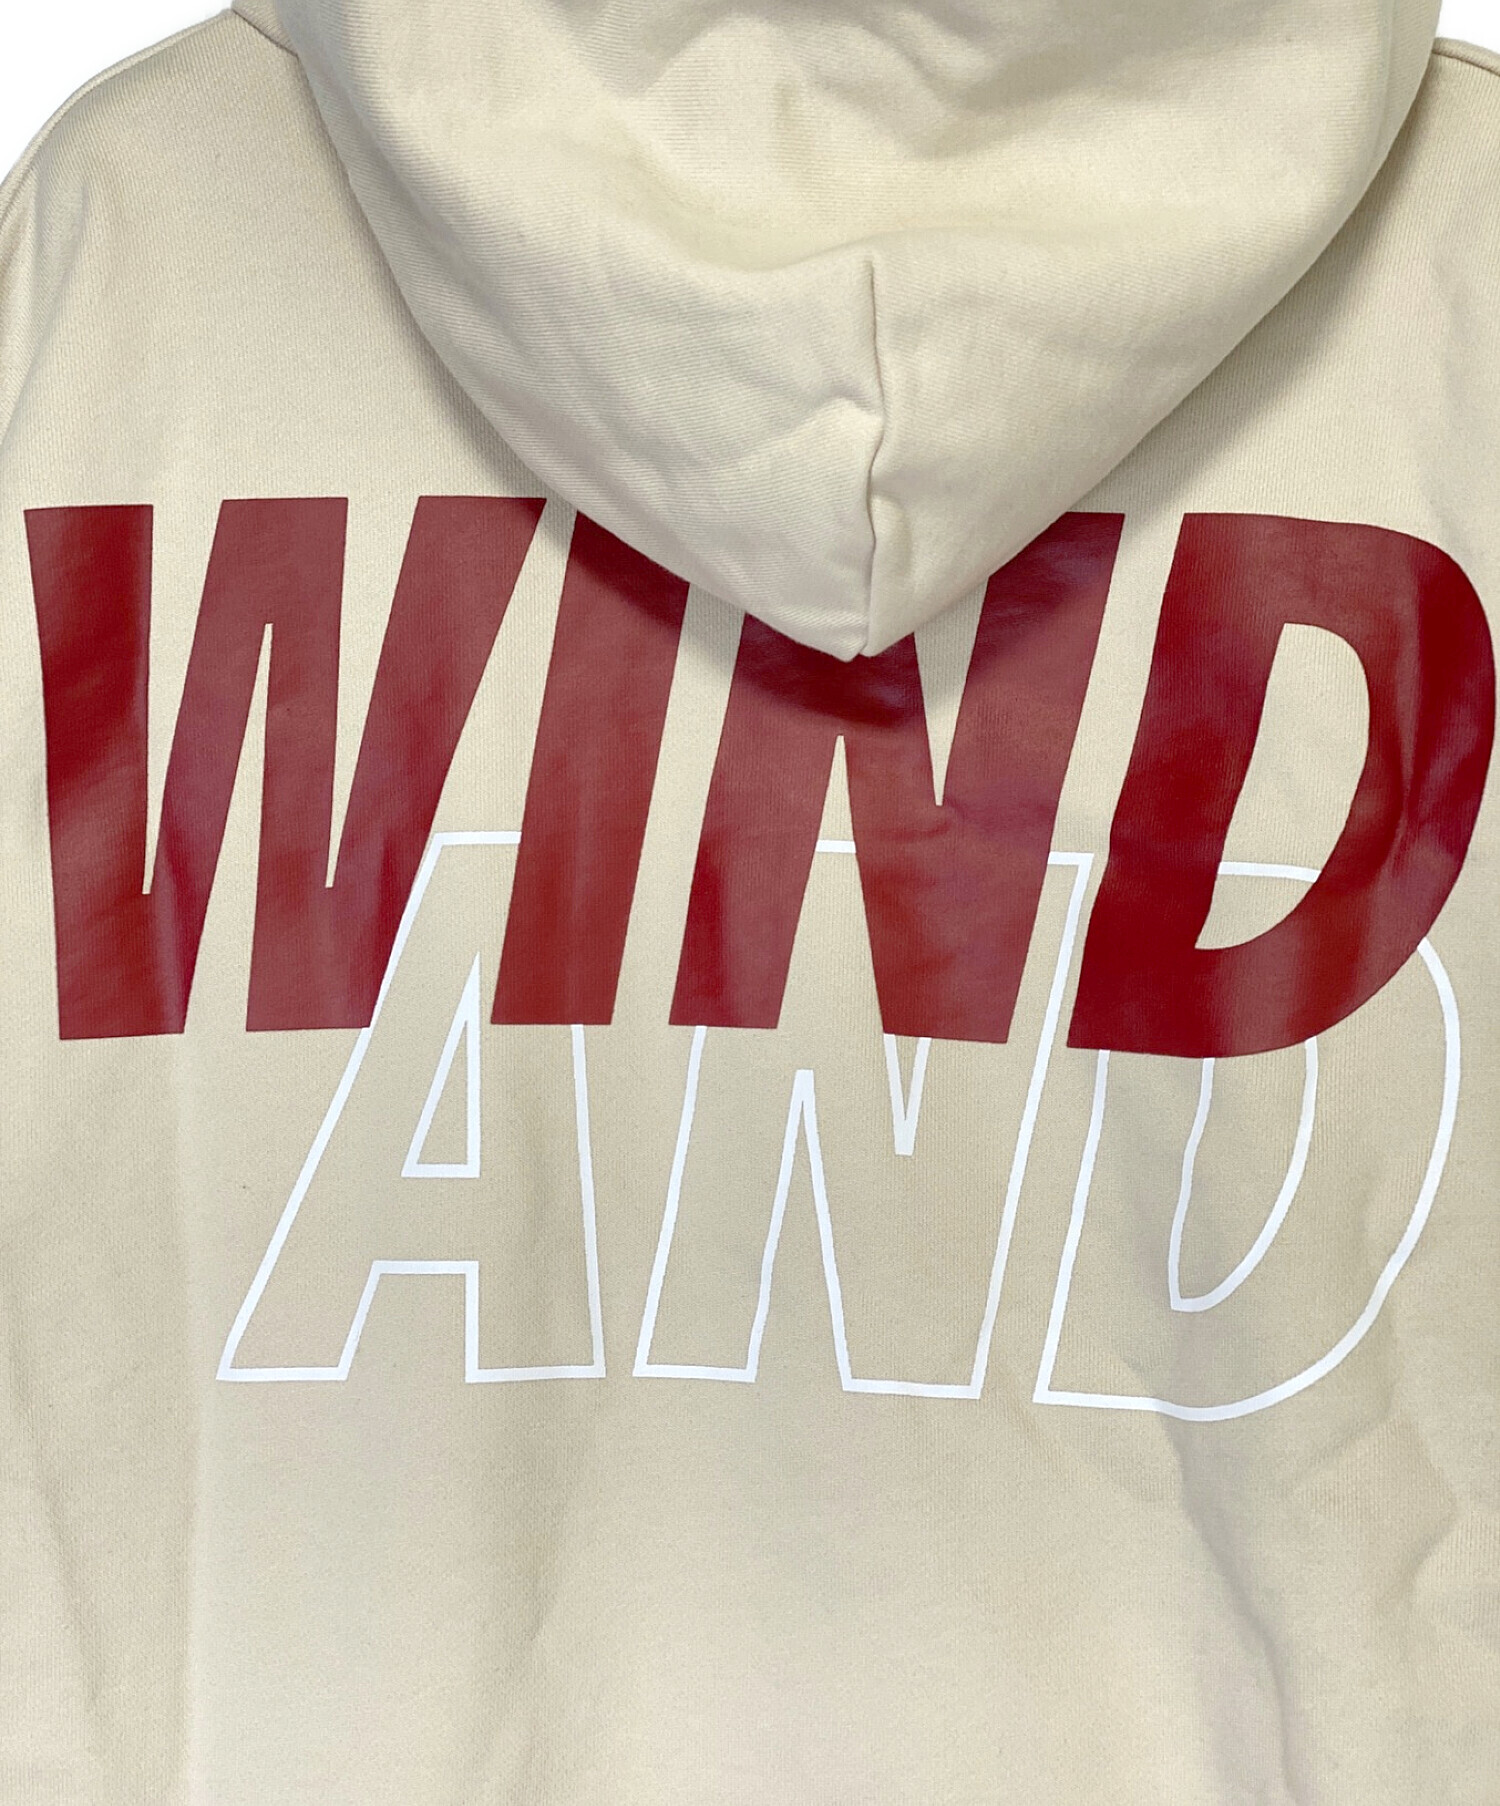 WIND AND SEA Hoodie / Taupe-Bordeauxフーディー